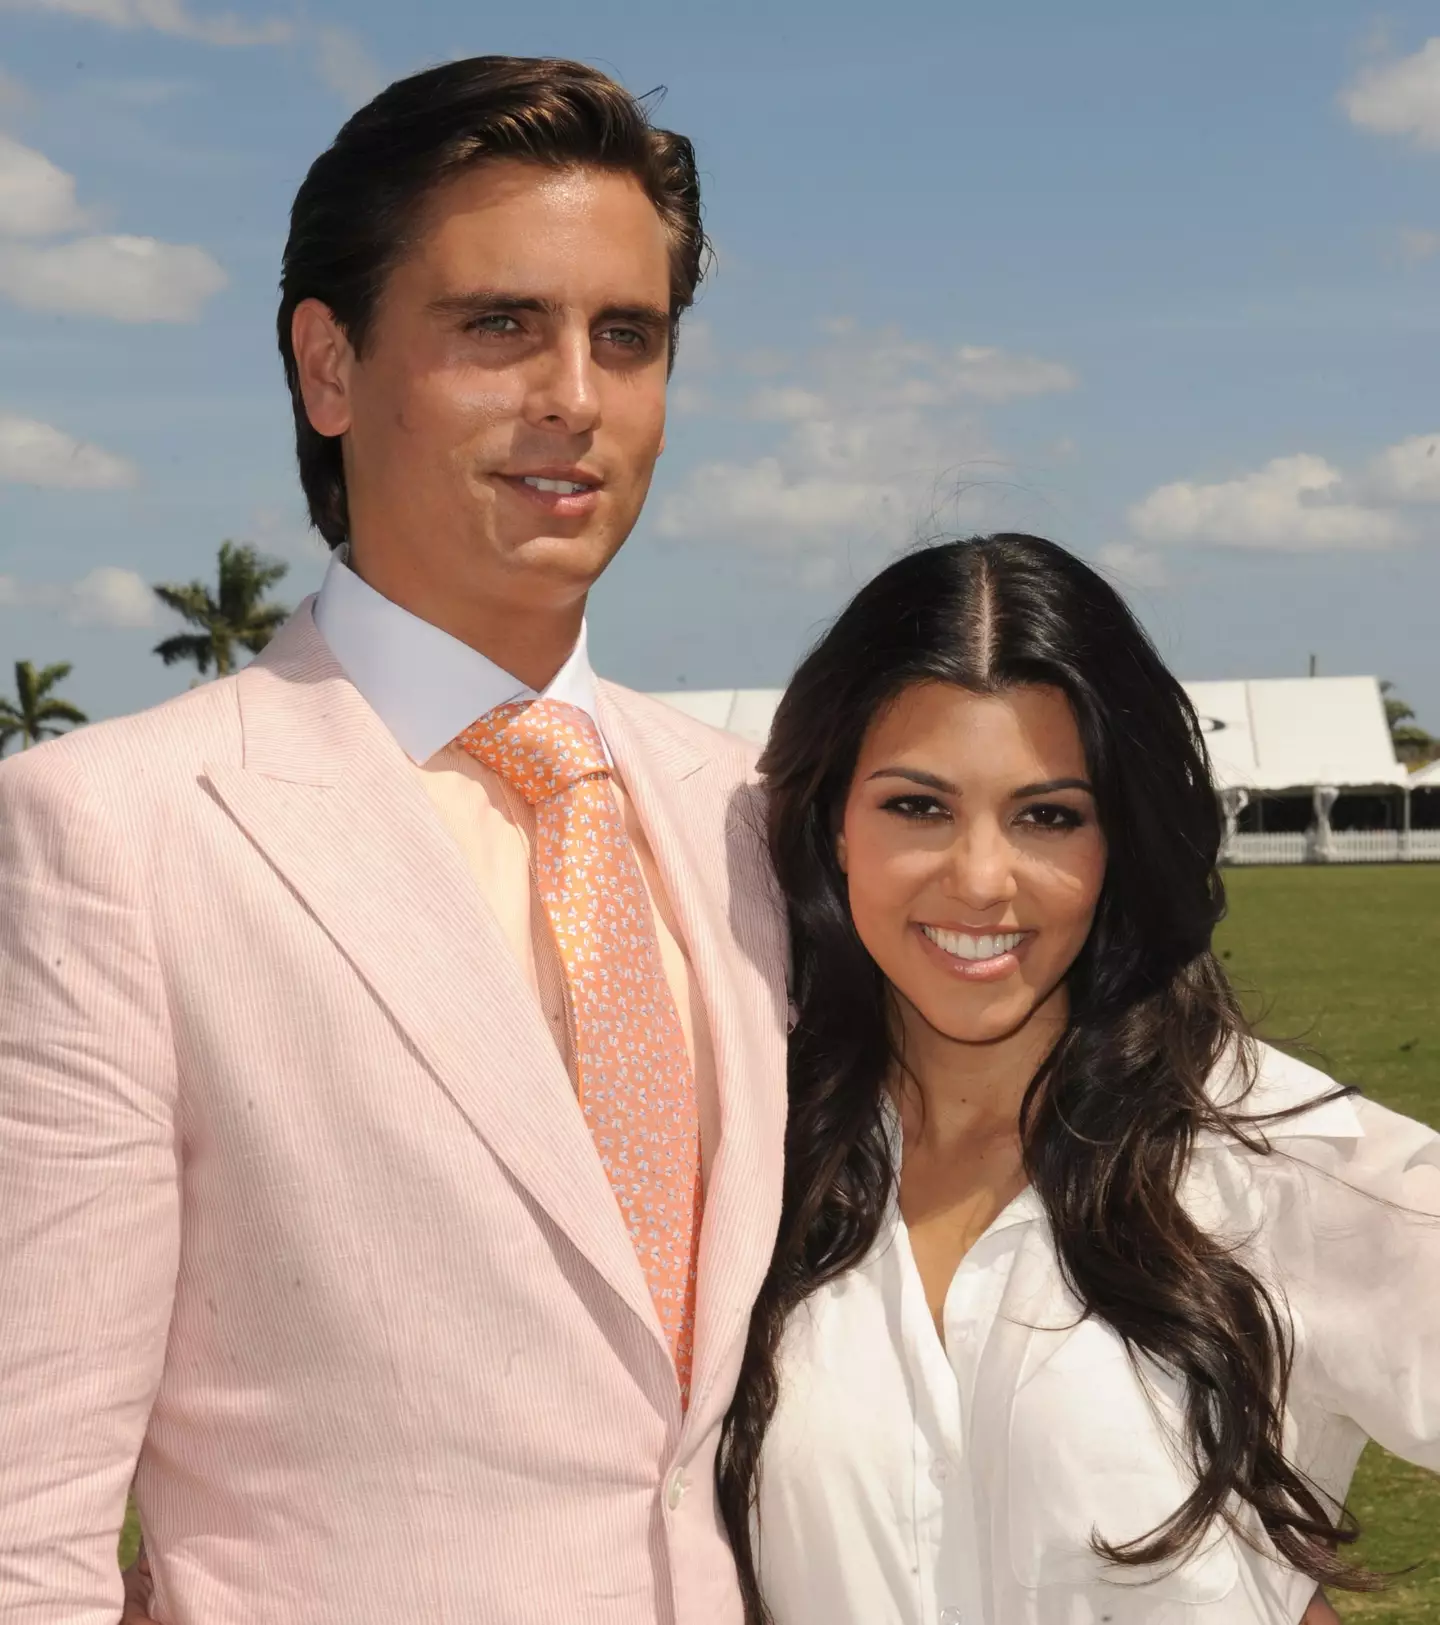 Scott and Kourtney were in an on-and-off relationship for nearly a decade.